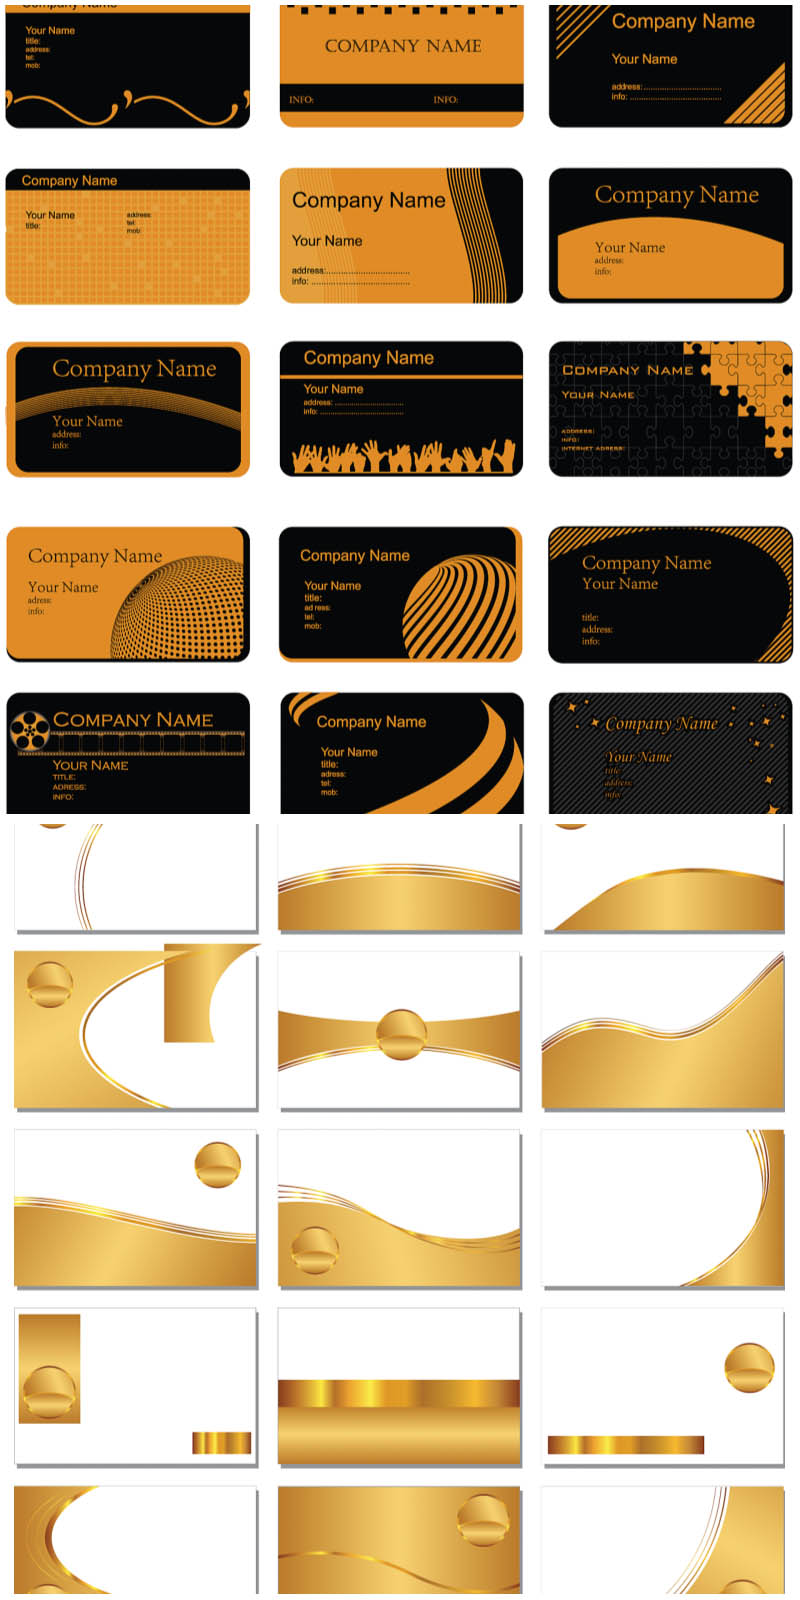 Yellow and orange business cards